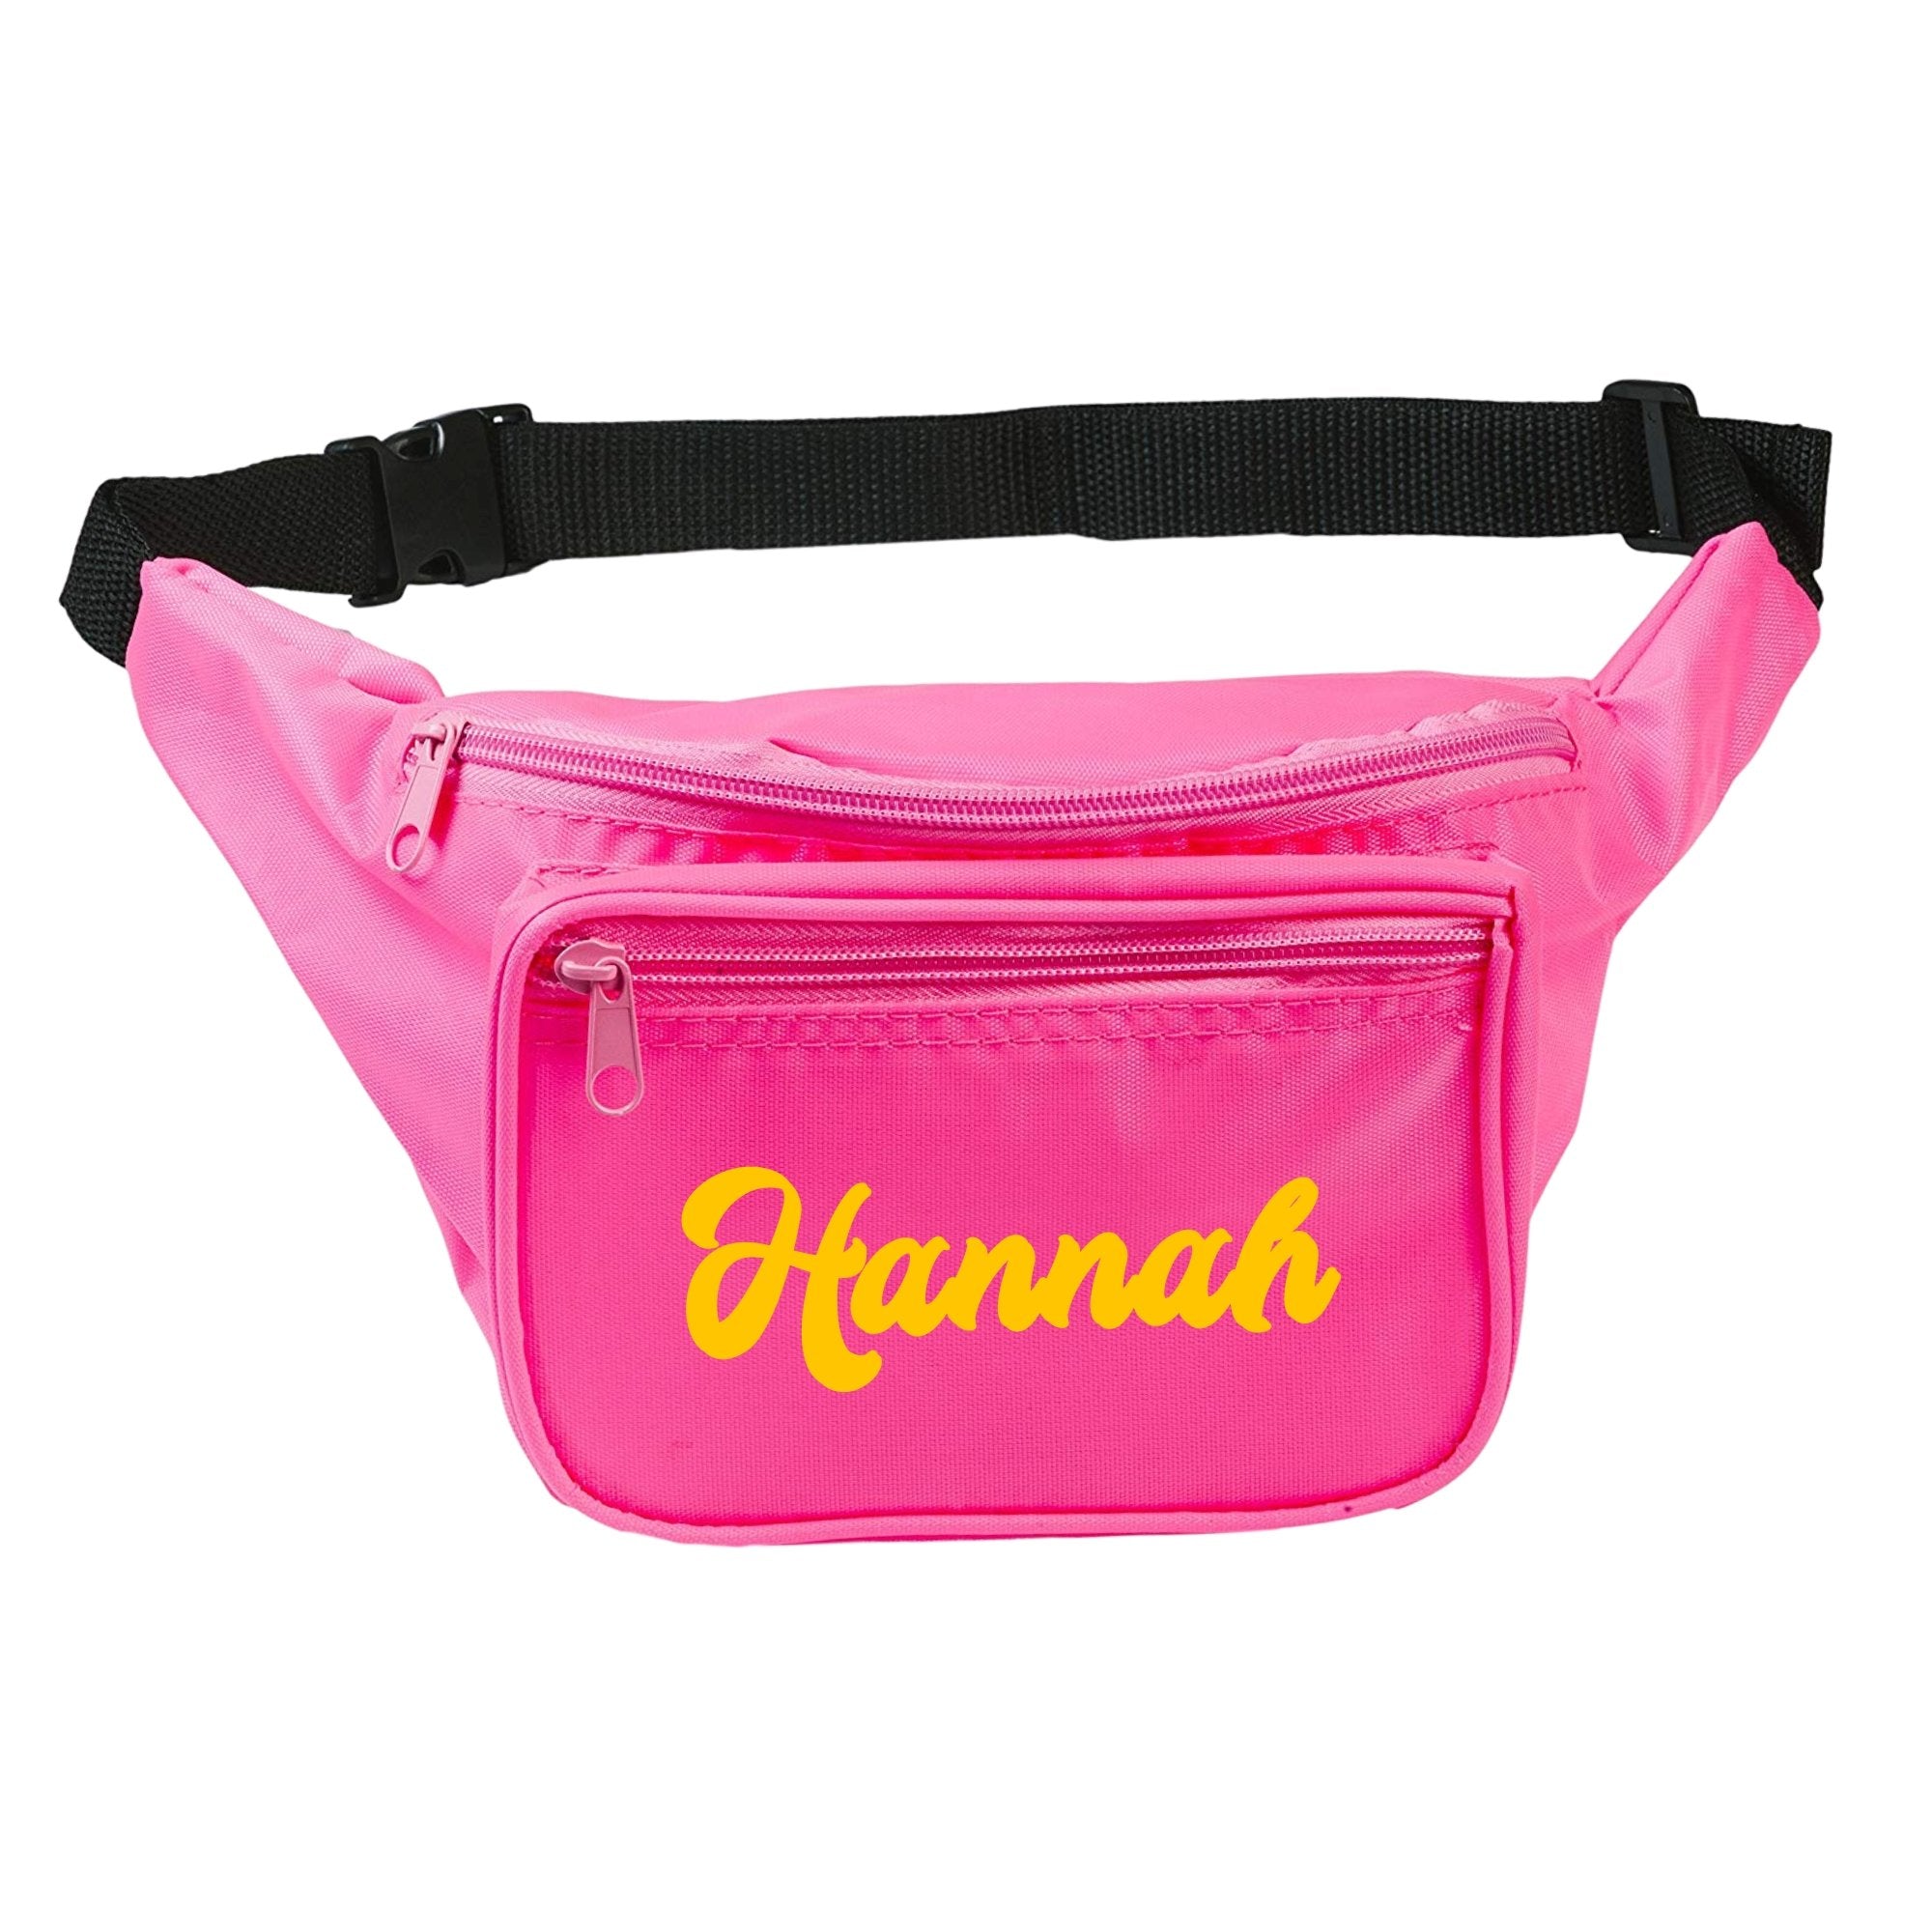 MIAIULIA 80s Neon Waist Fanny Pack for 80s Costumes,Festival Travel Party